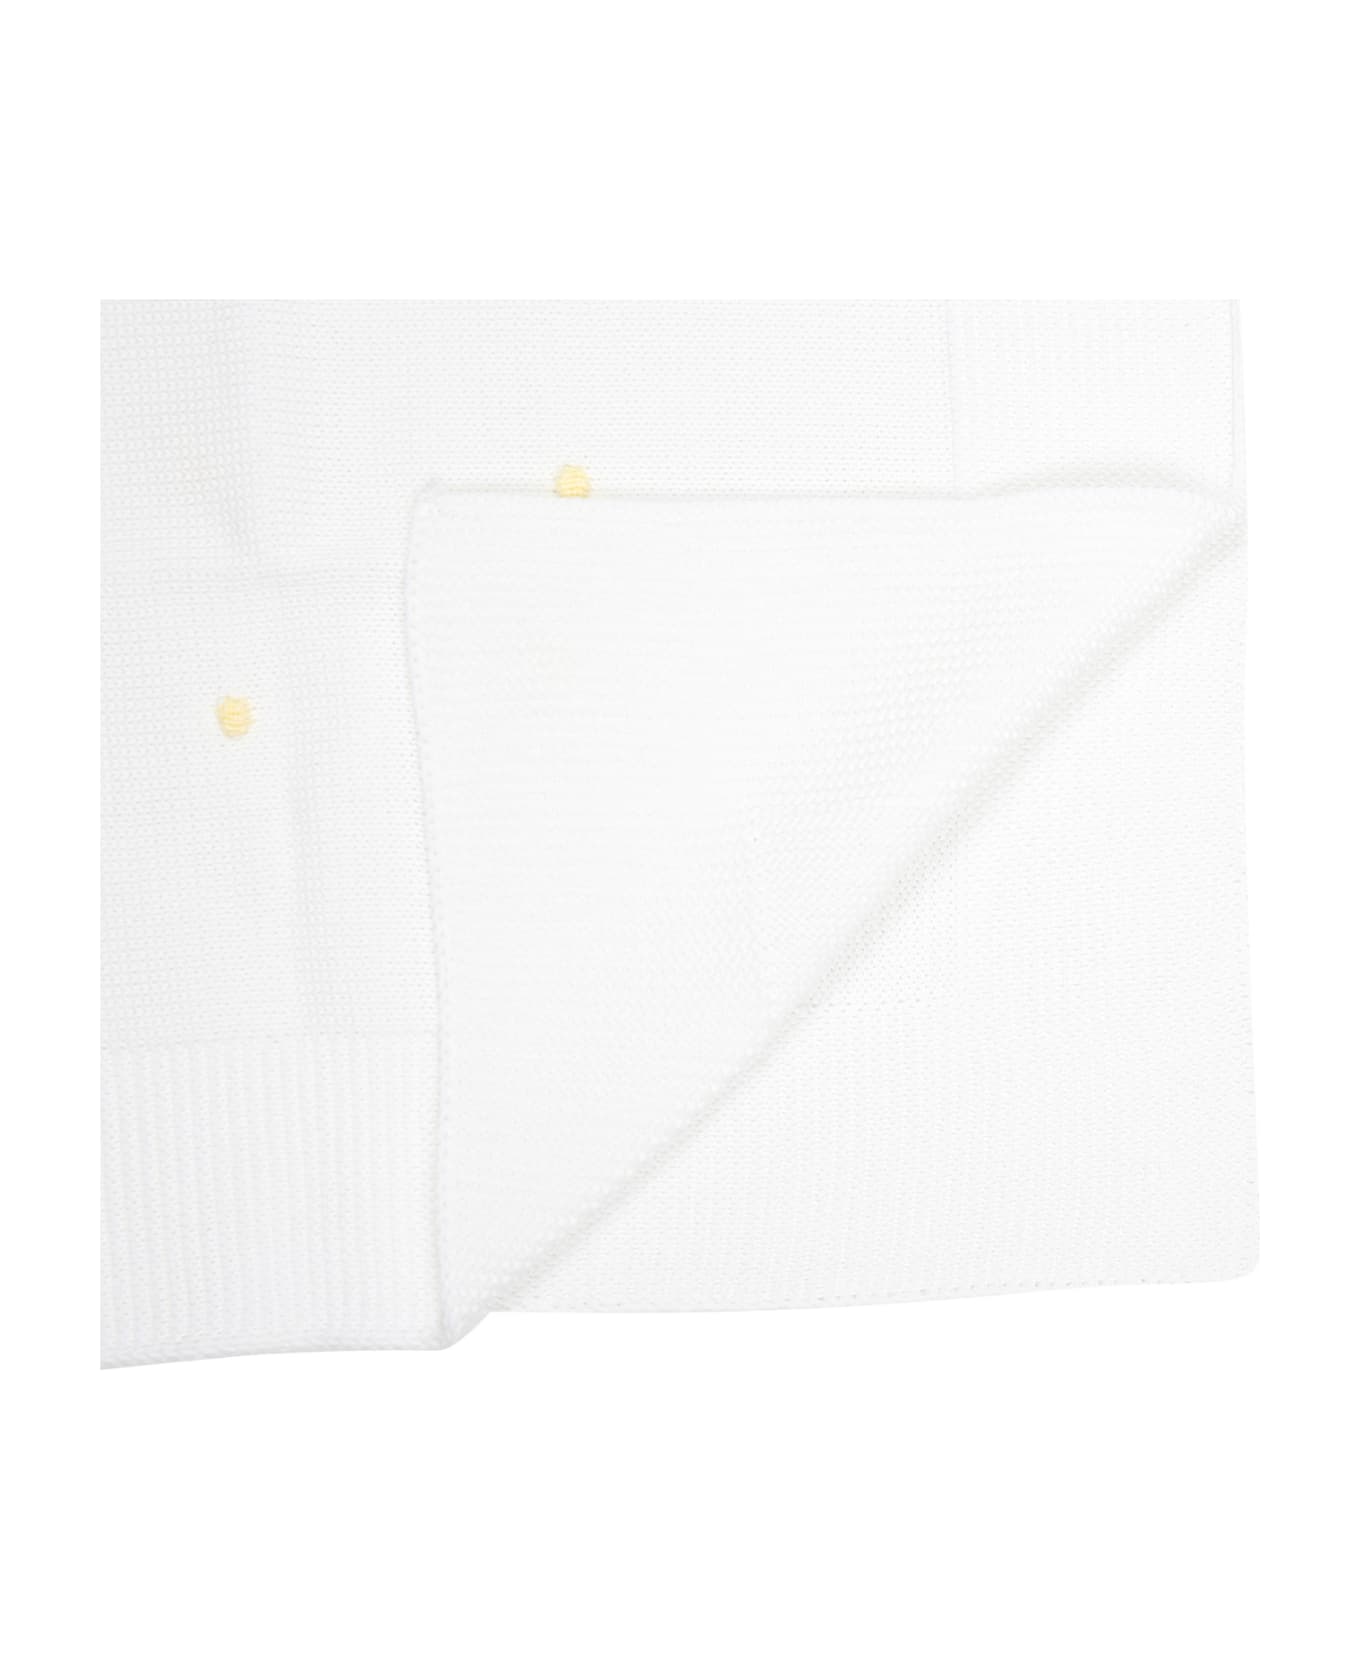 Little Bear White Baby Blanket For Baby Kids With Yellow Polka Dots - White